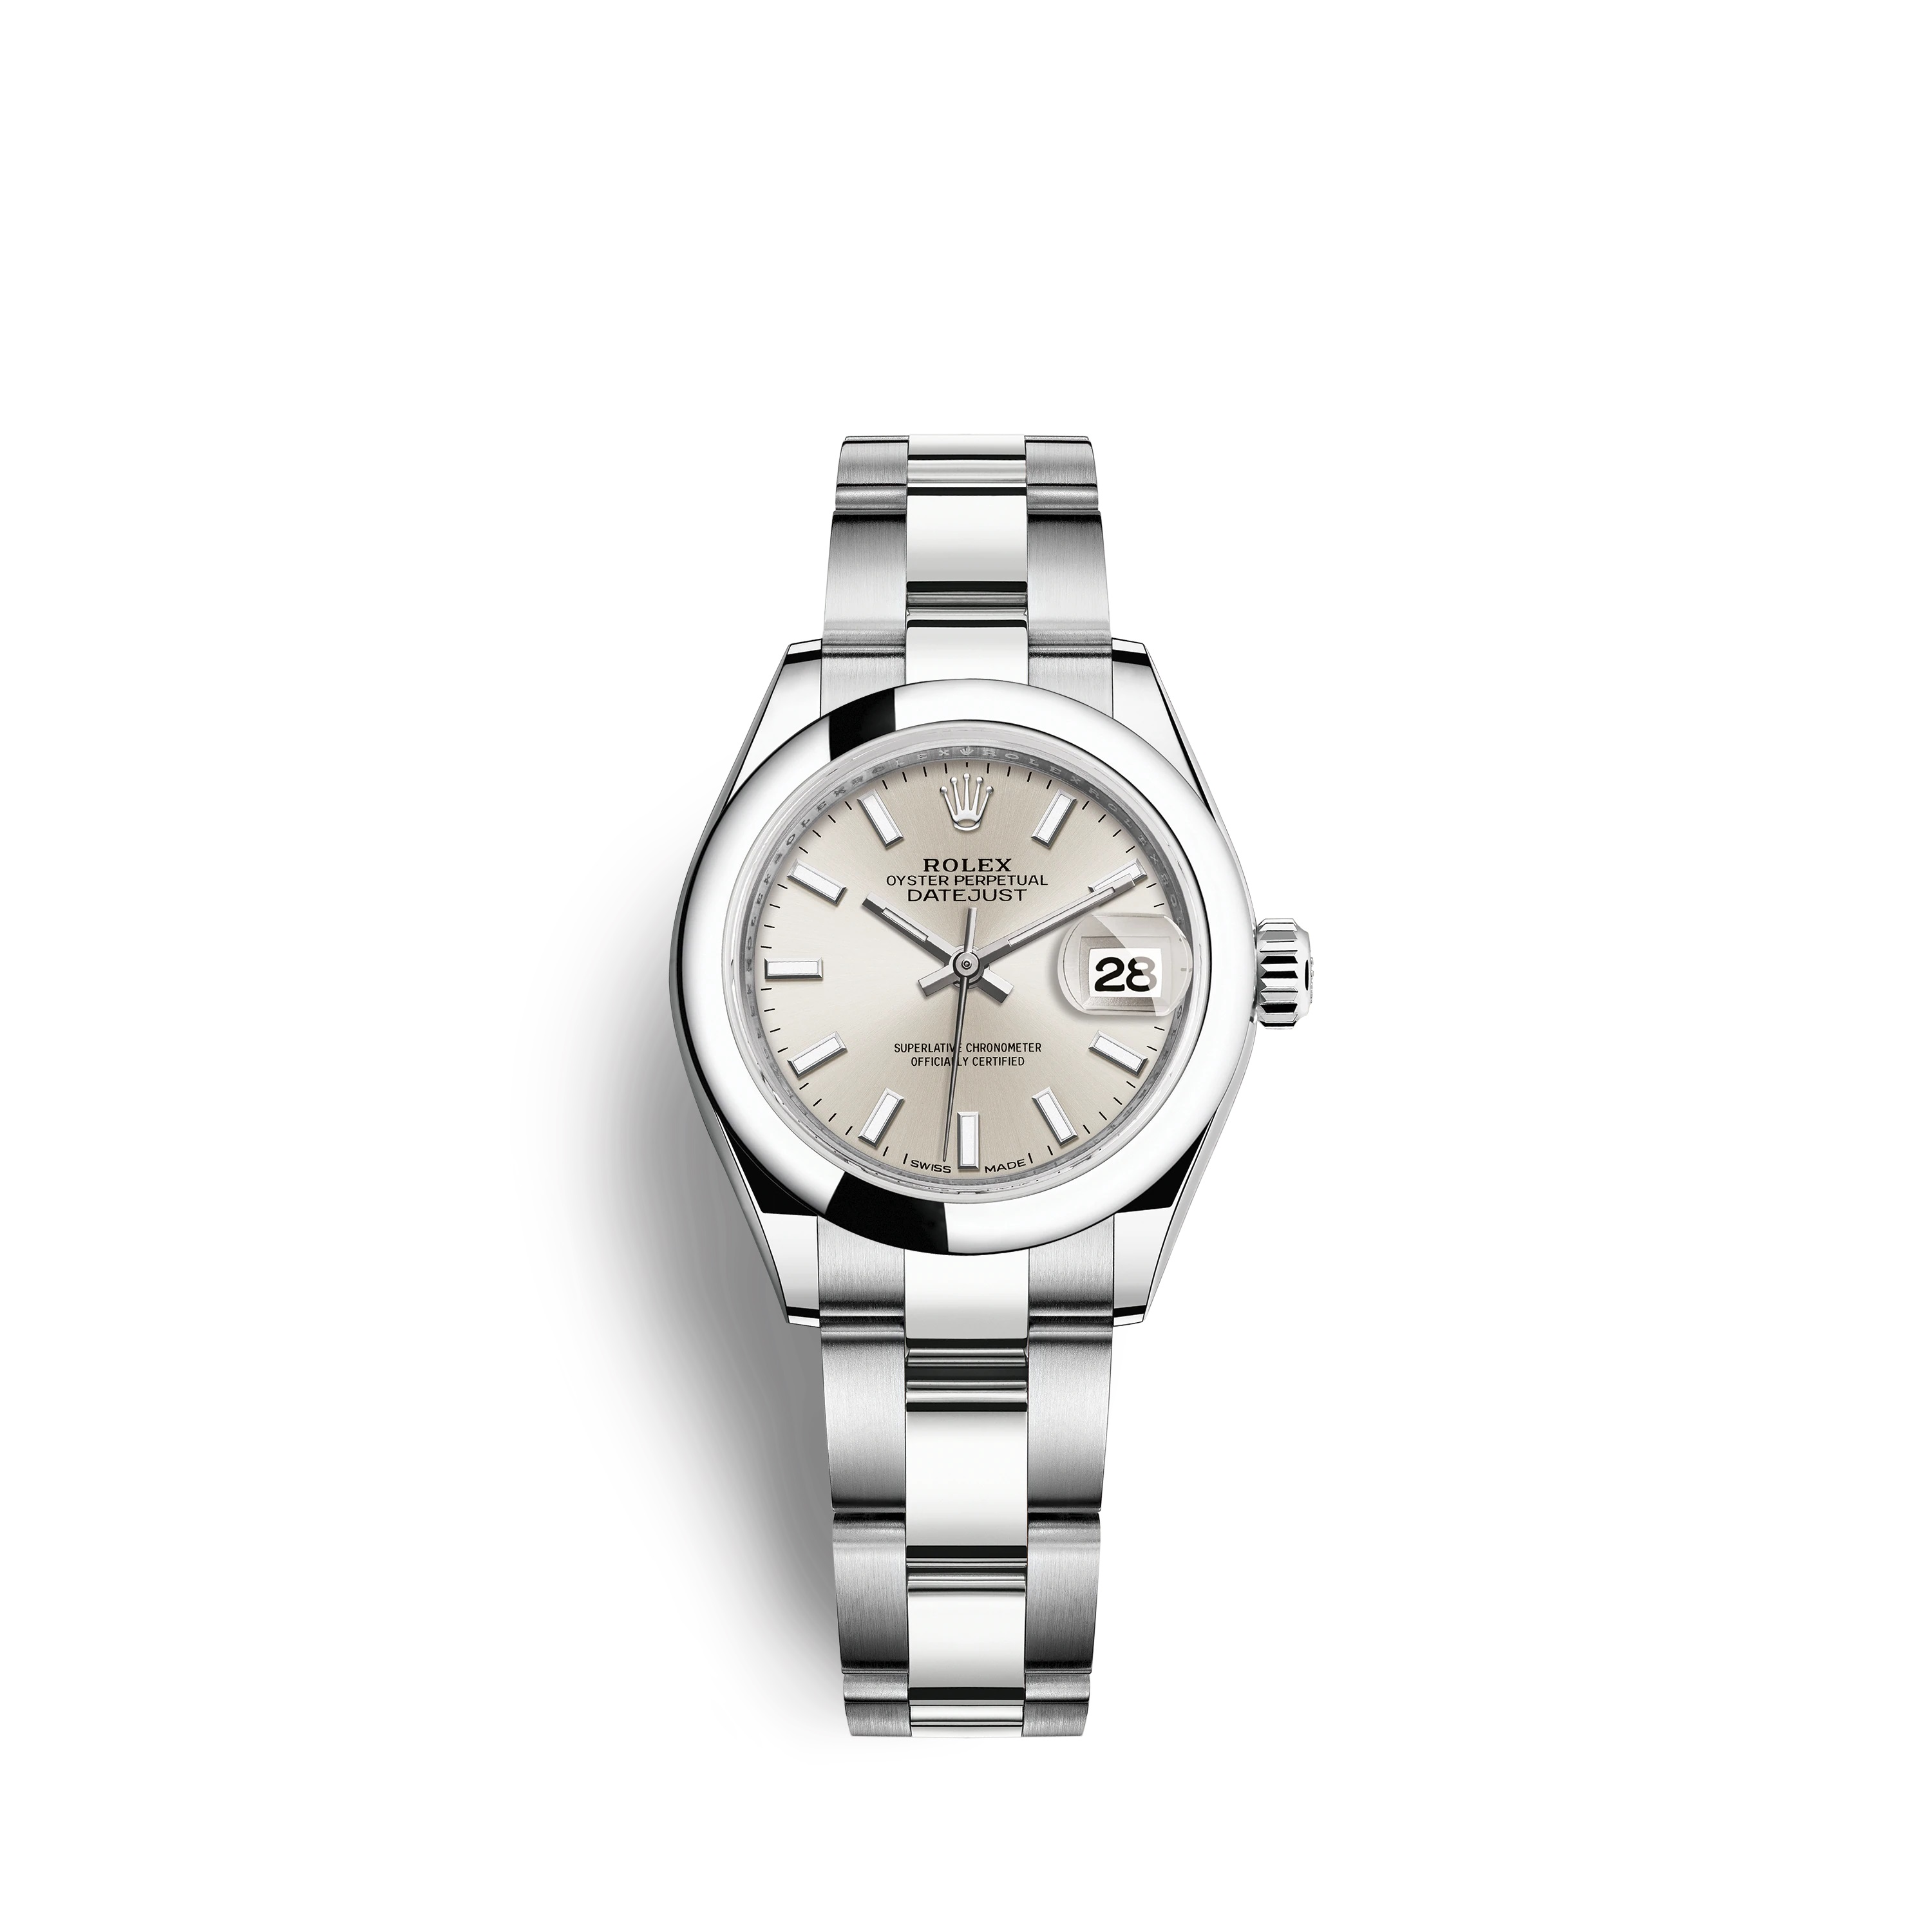 Lady-Datejust 28 279160 Stainless Steel Watch (Silver)